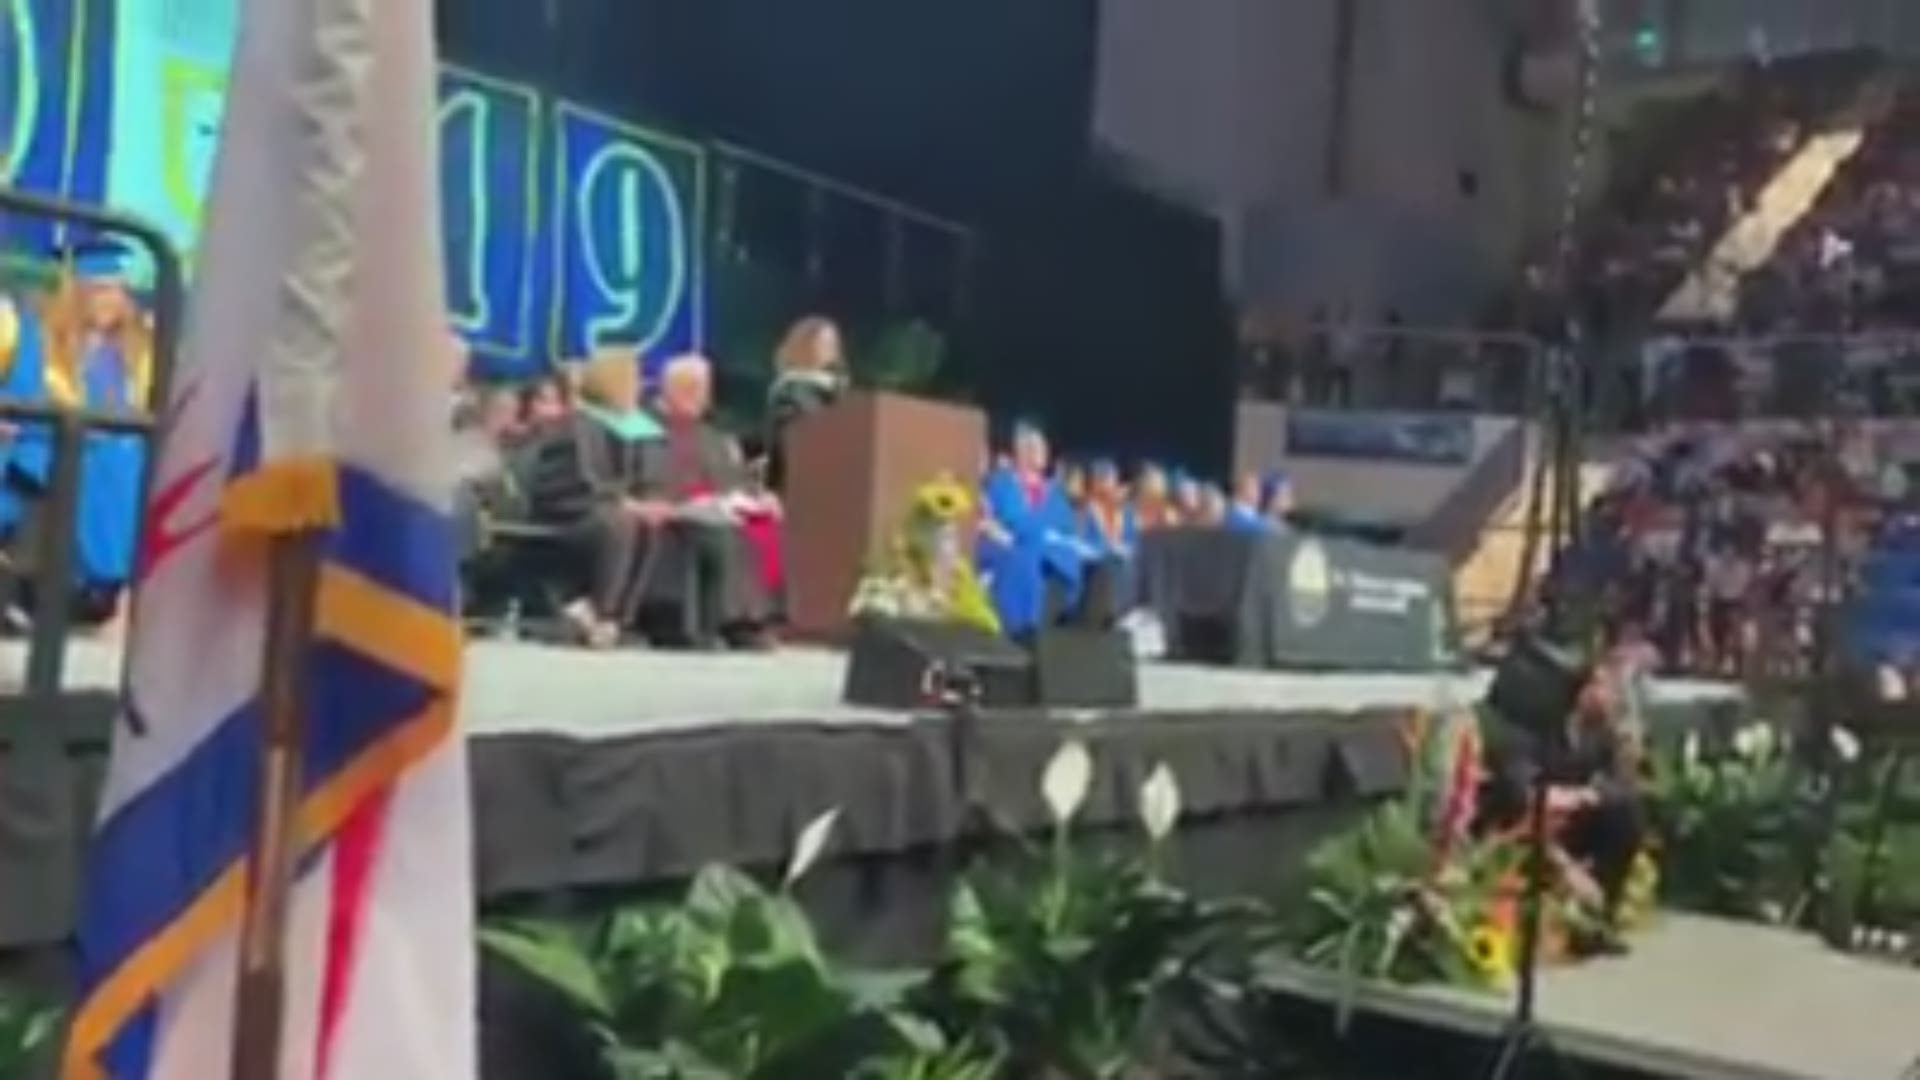 Senior Kayla Tillman had the surprise of a lifetime when her father came from his deployment in Korea to surprise her at graduation. Video: St. Thomas Aquinas High School